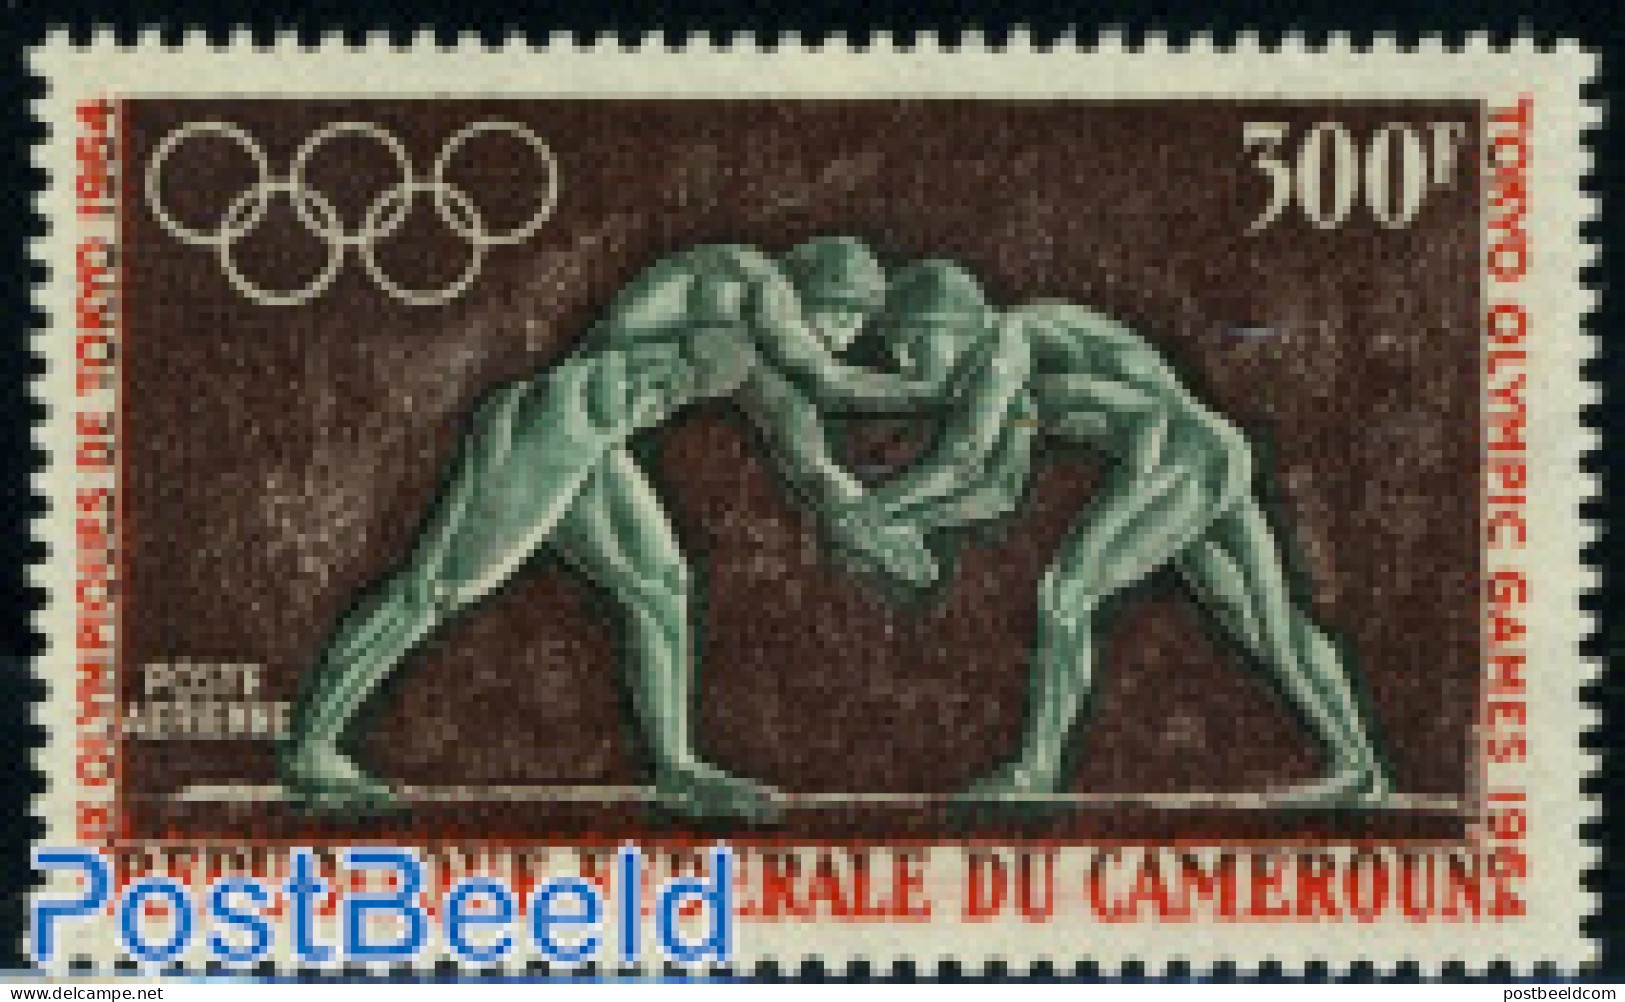 Cameroon 1964 Stamp Out Of Set, Mint NH, Sport - Olympic Games - Kameroen (1960-...)